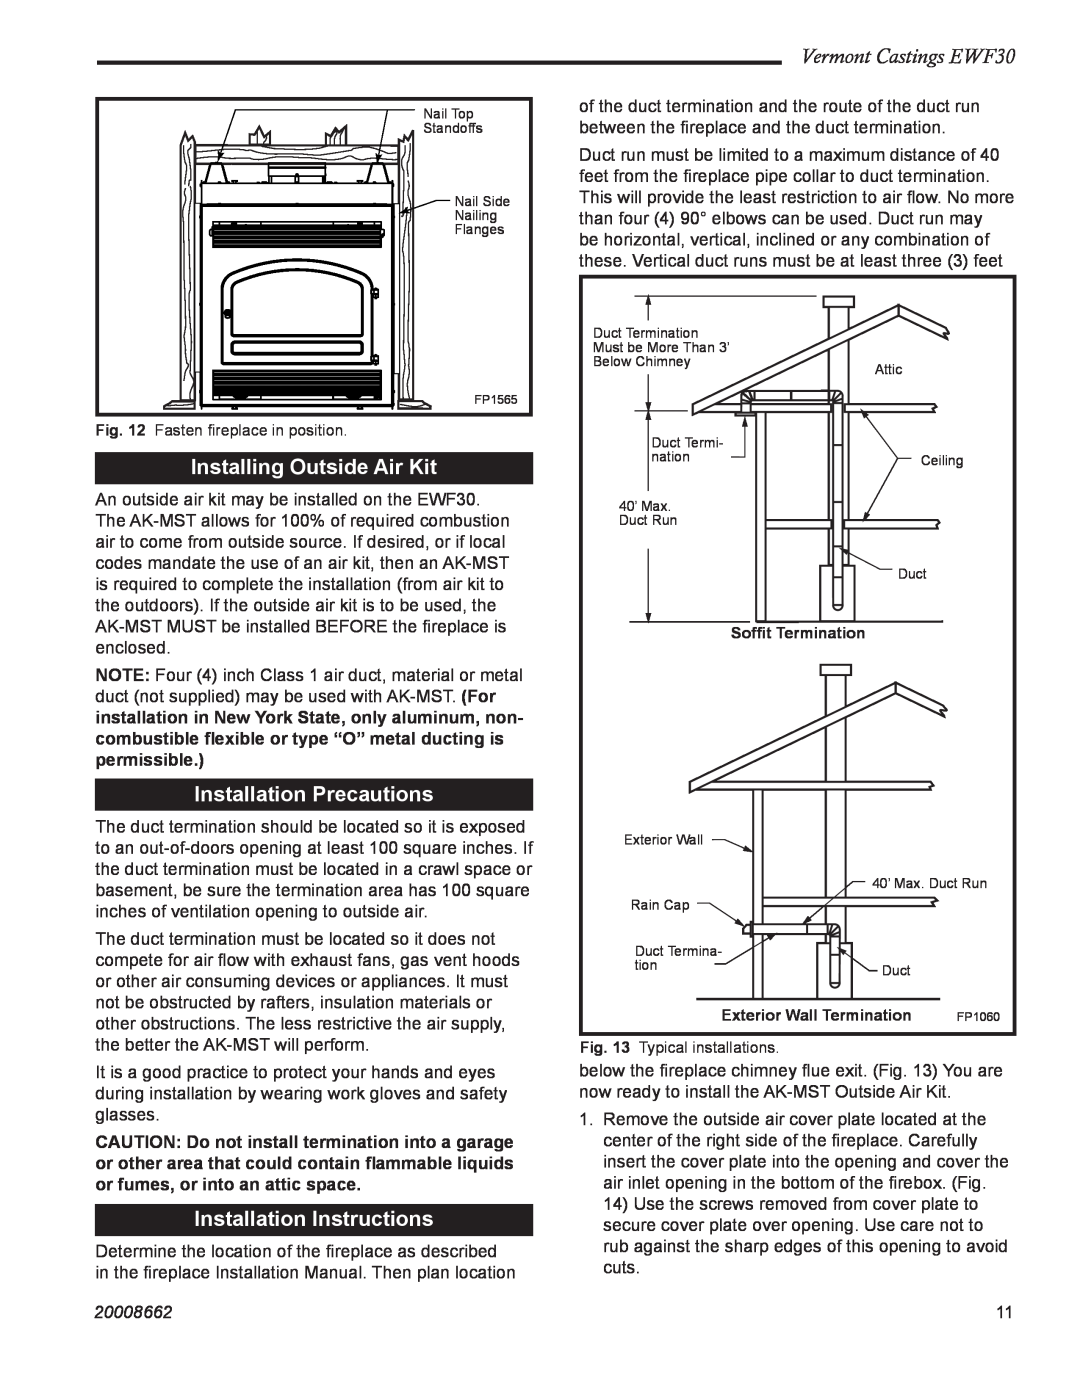 Vermont Casting EWF30 Installing Outside Air Kit, Installation Precautions, Installation Instructions, 20008662 